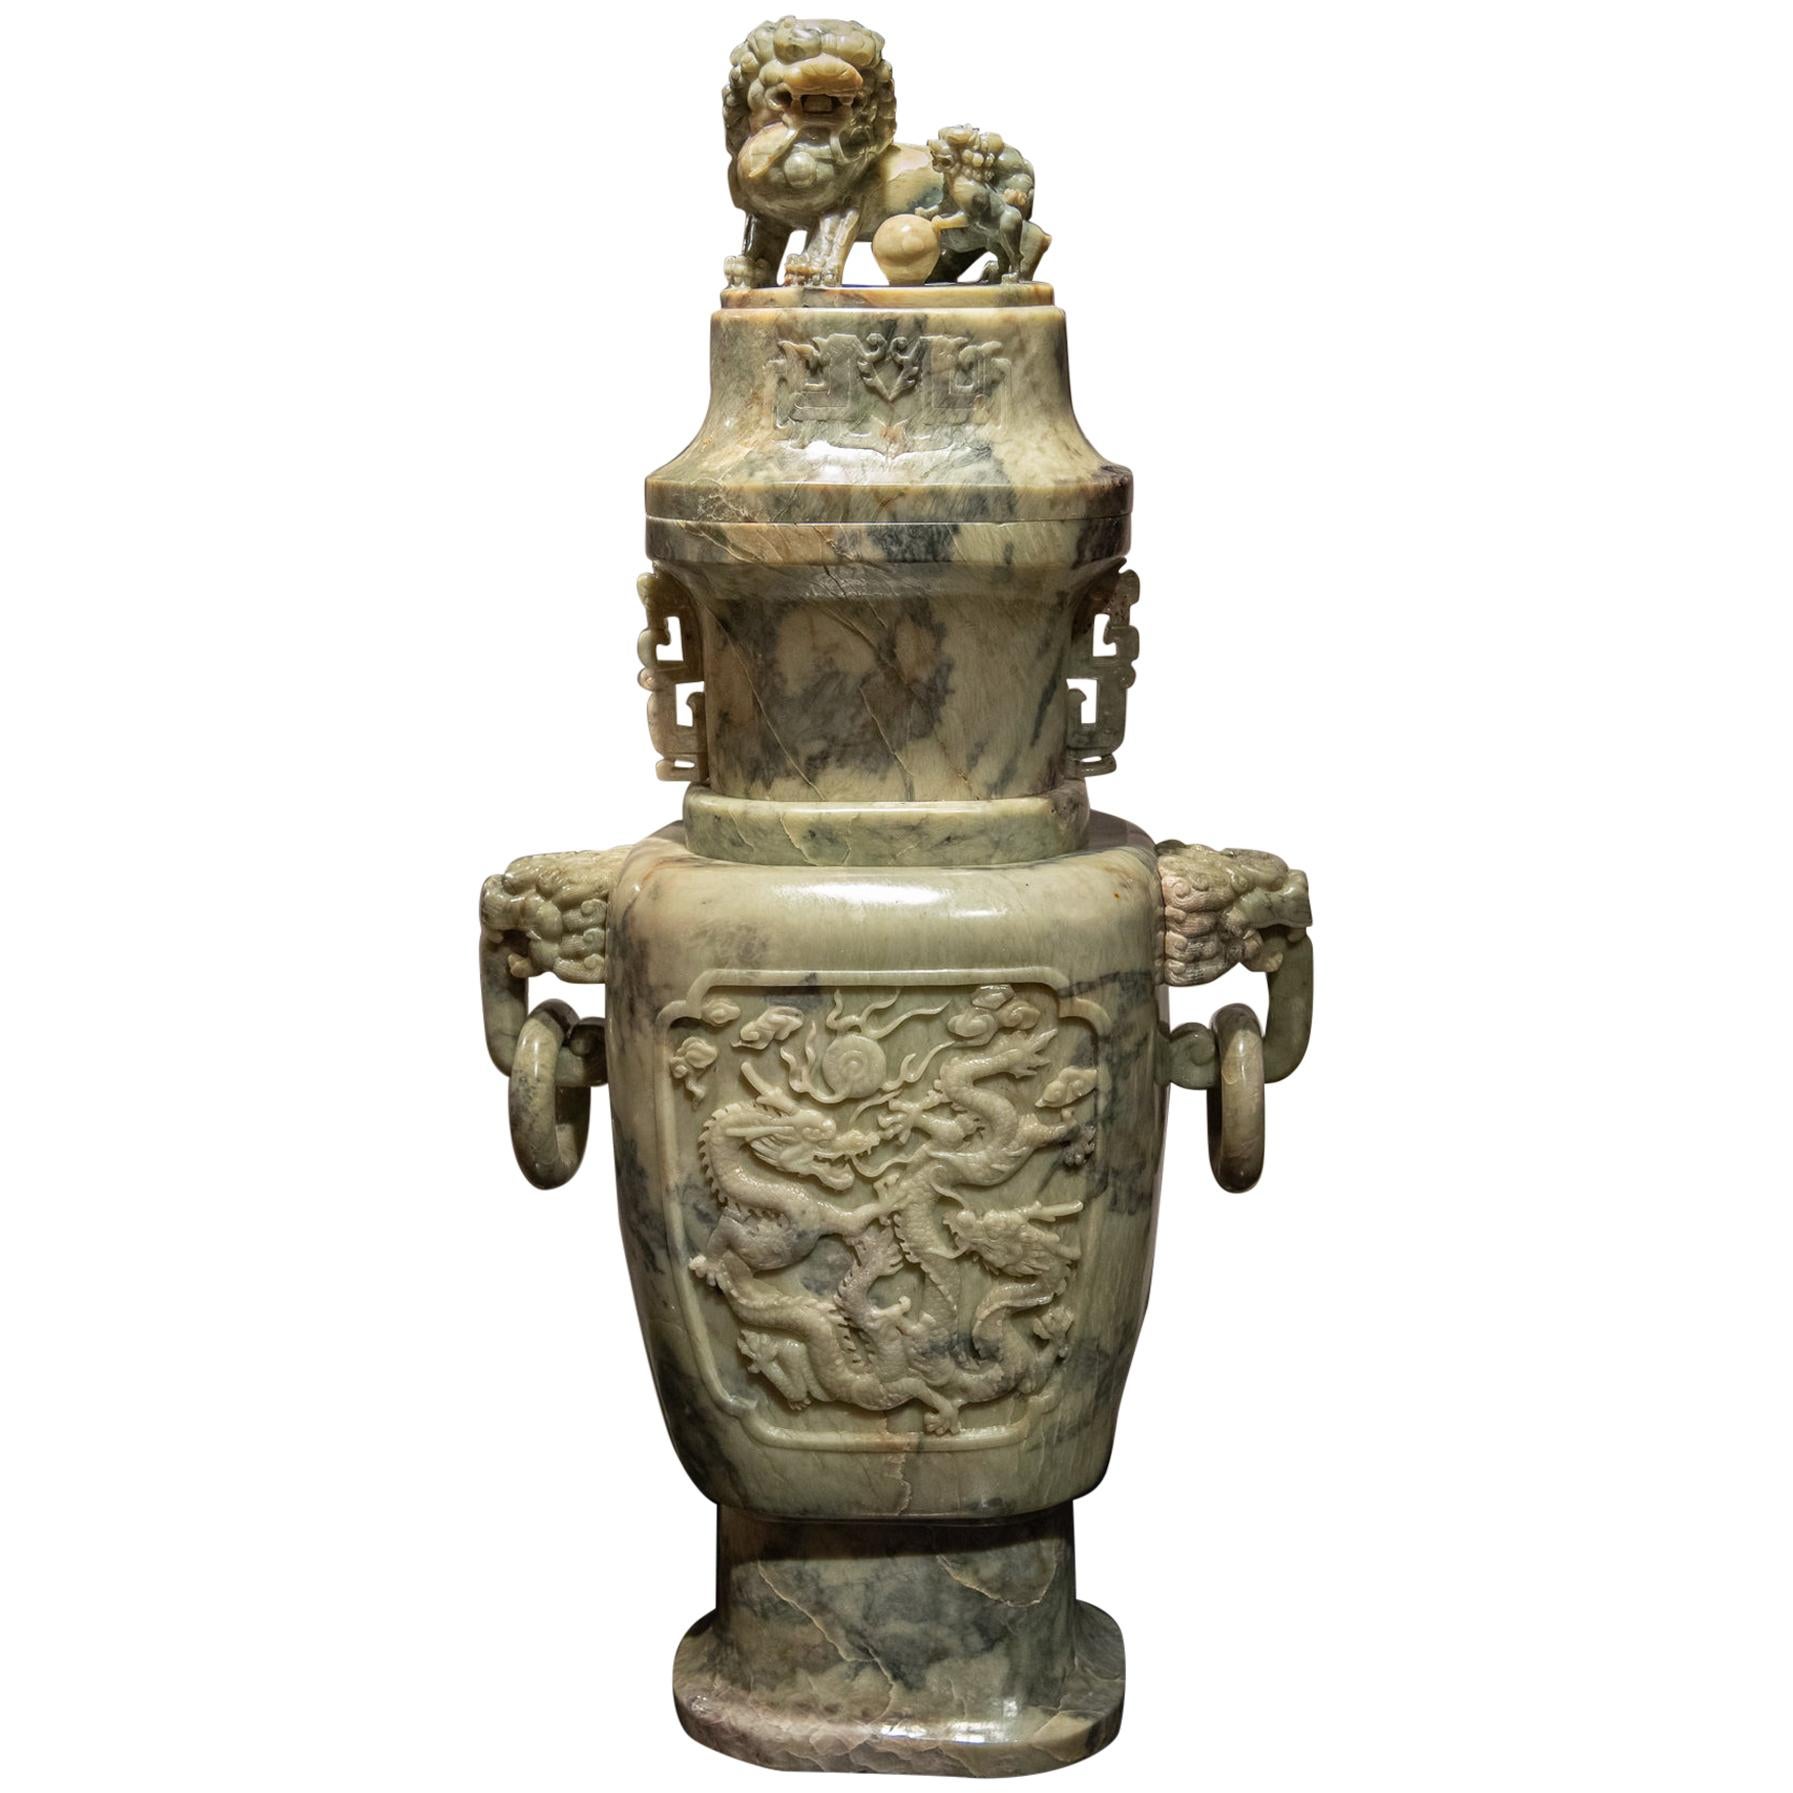 Exceptional Single Monumental Covered Urn of Archaic Fung Lei Form